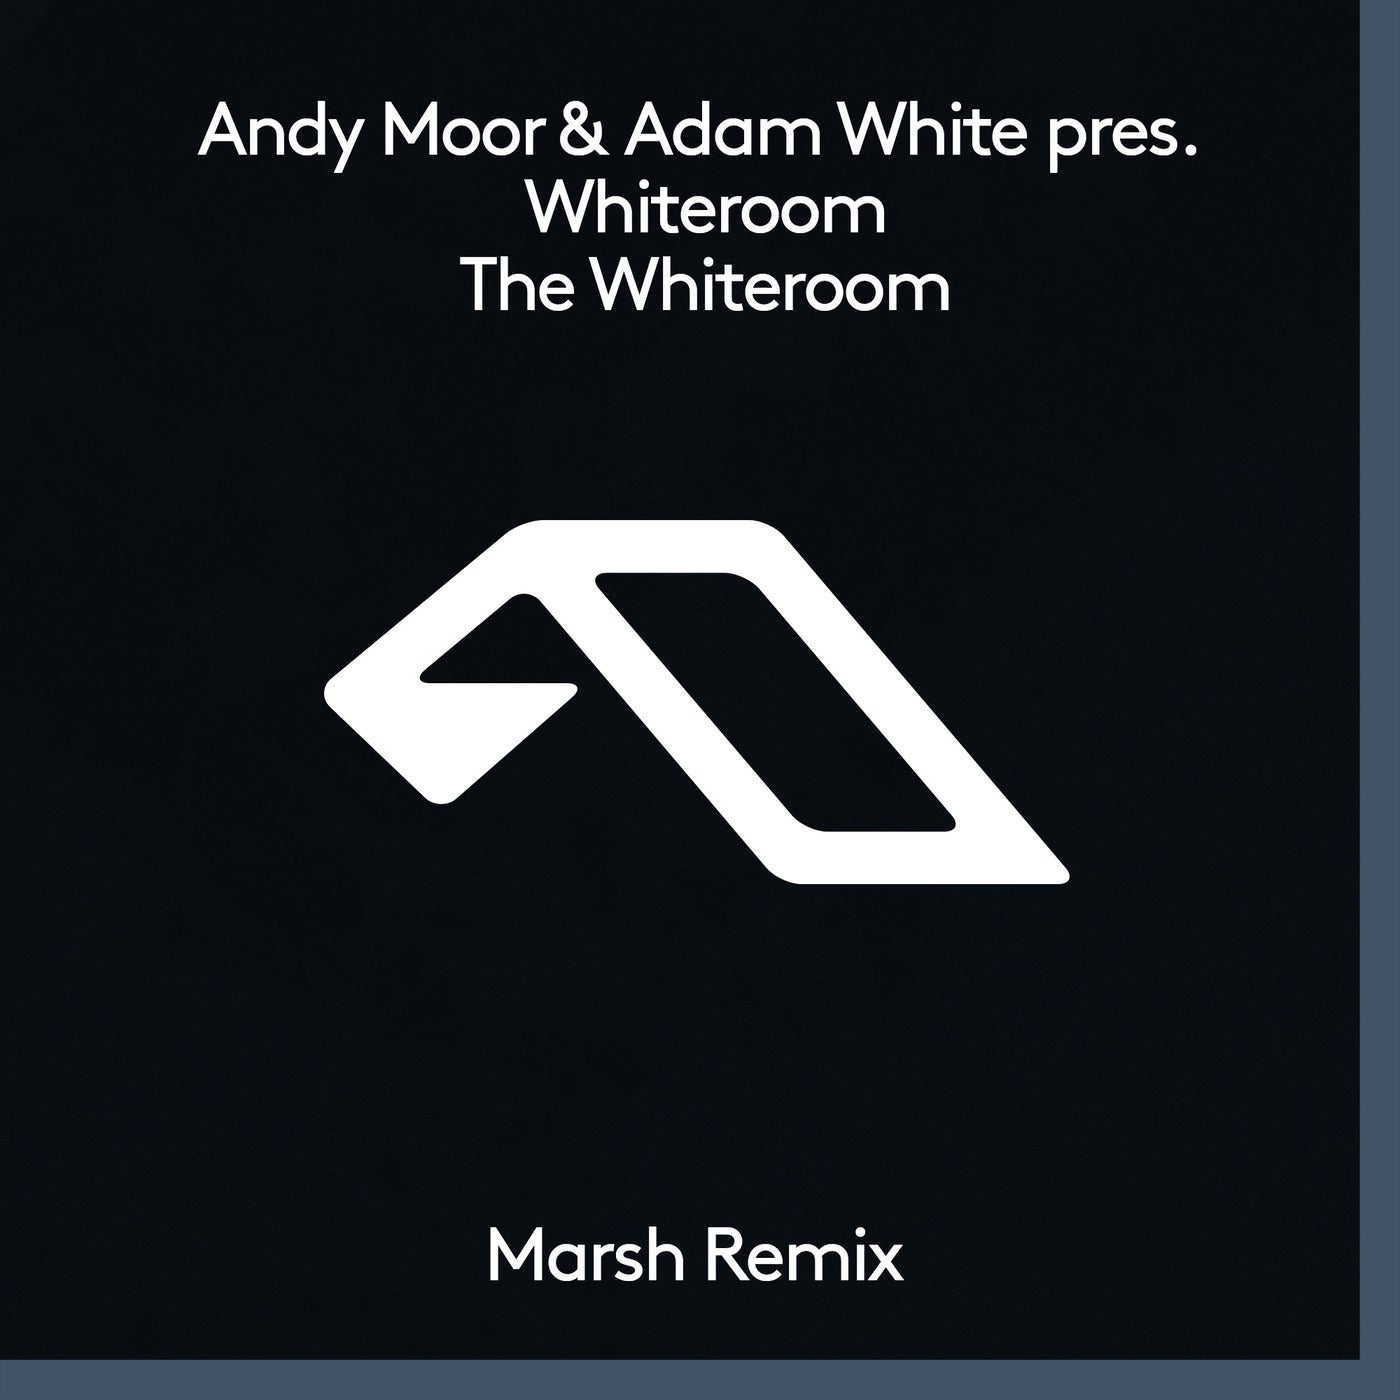 The Whiteroom feat. Whiteroom (Marsh Extended Mix)